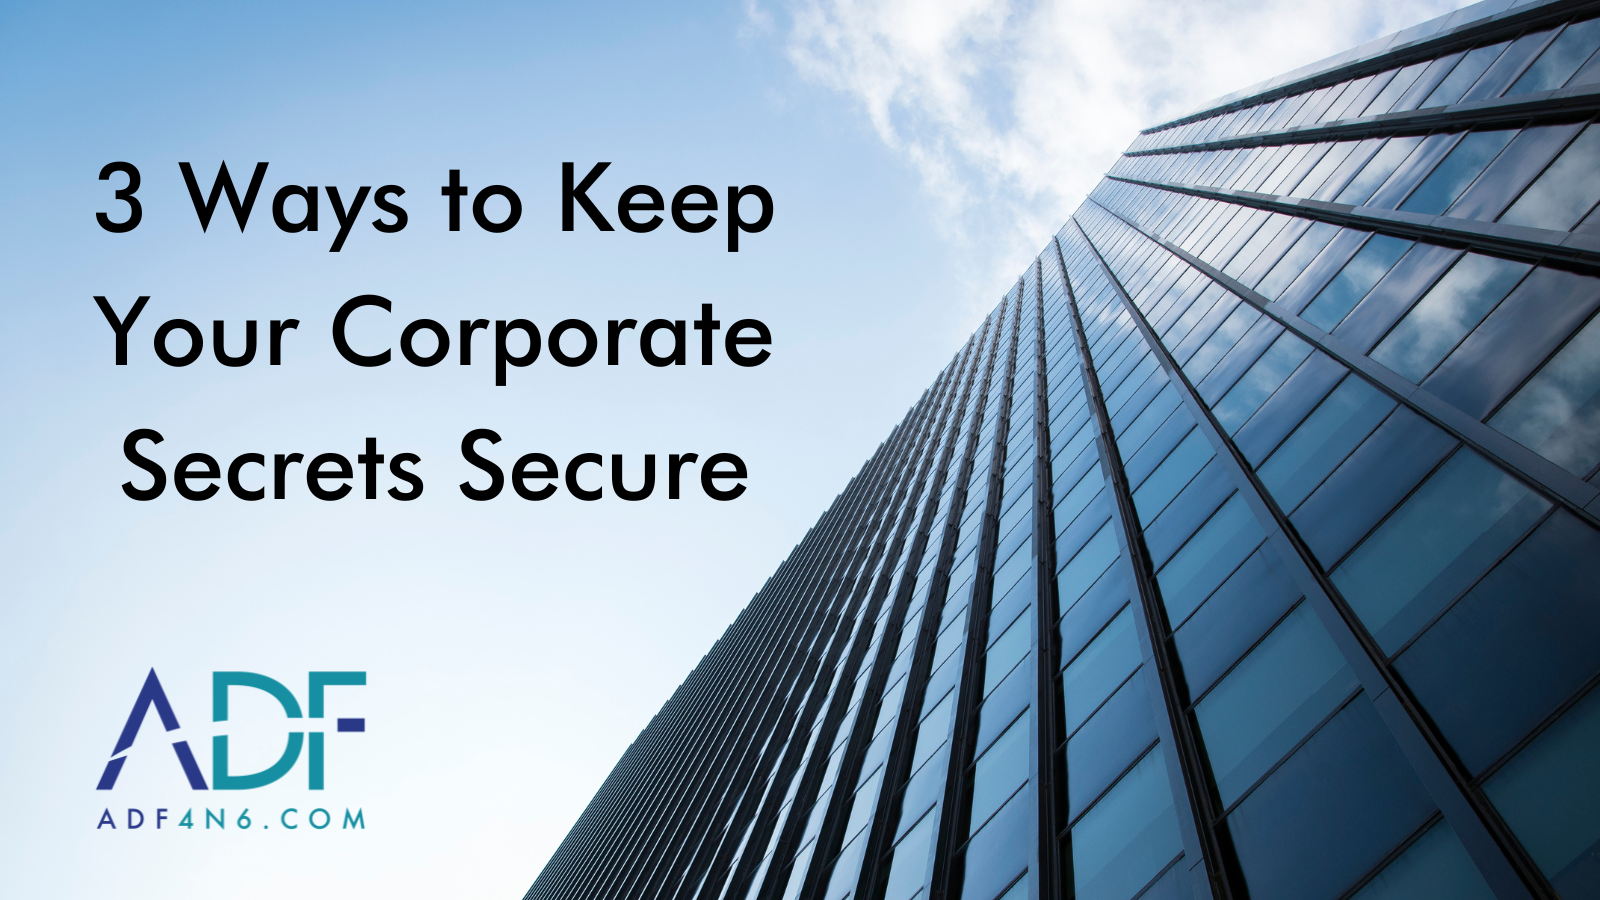 3 Ways to Keep Your Corporate Secrets Secure